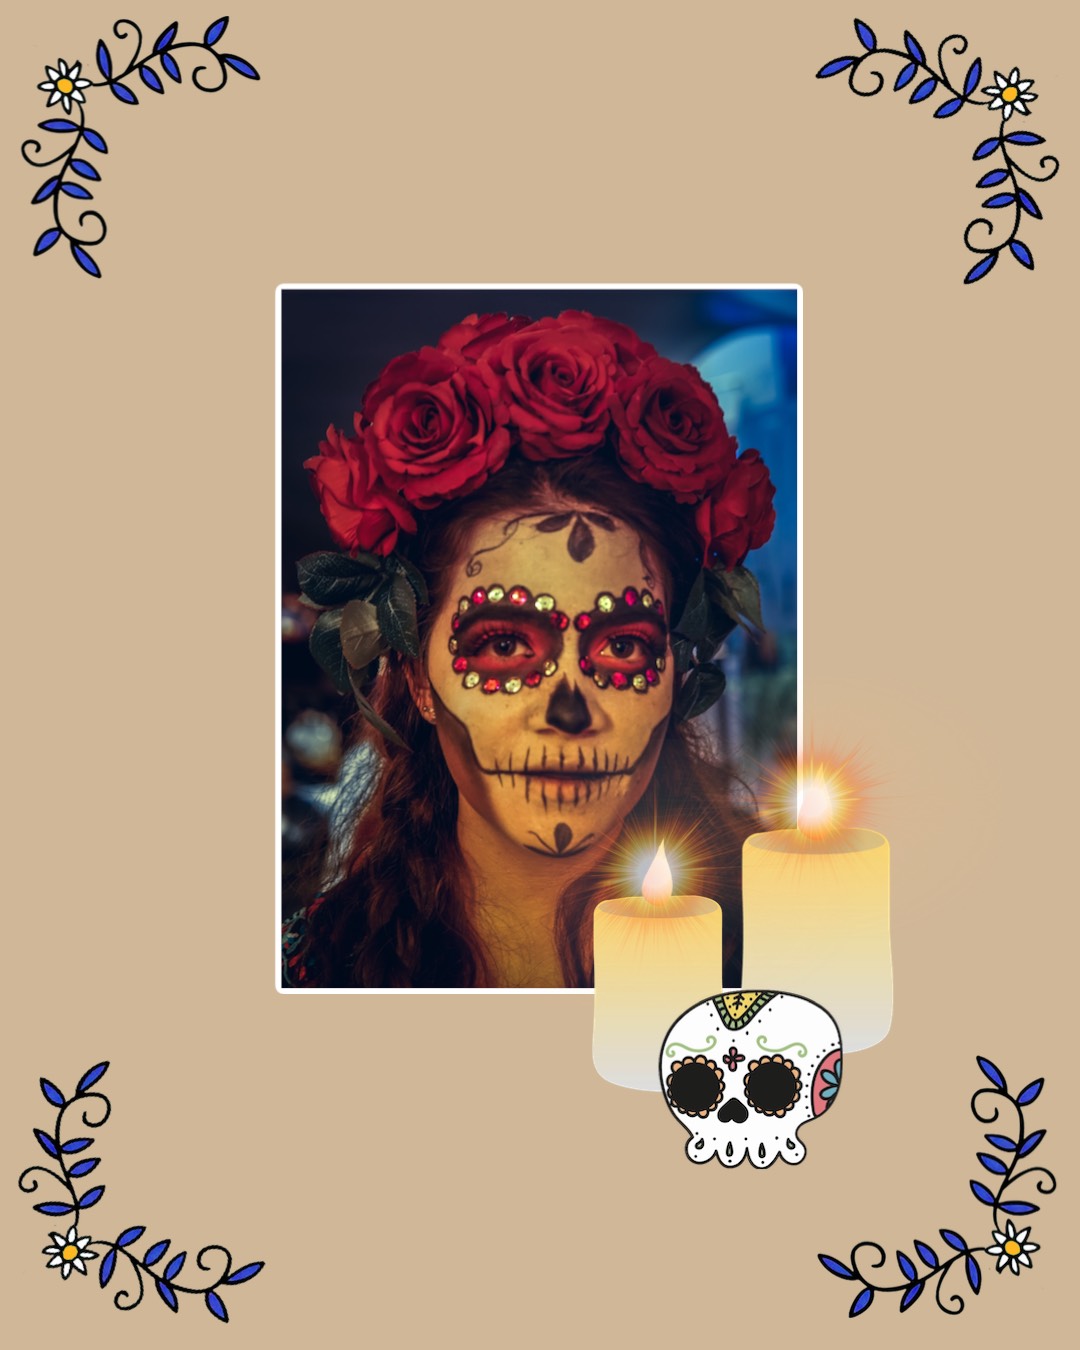 A Picture Of A Woman With A Skull And Roses On Her Head Day Of The Dead Template